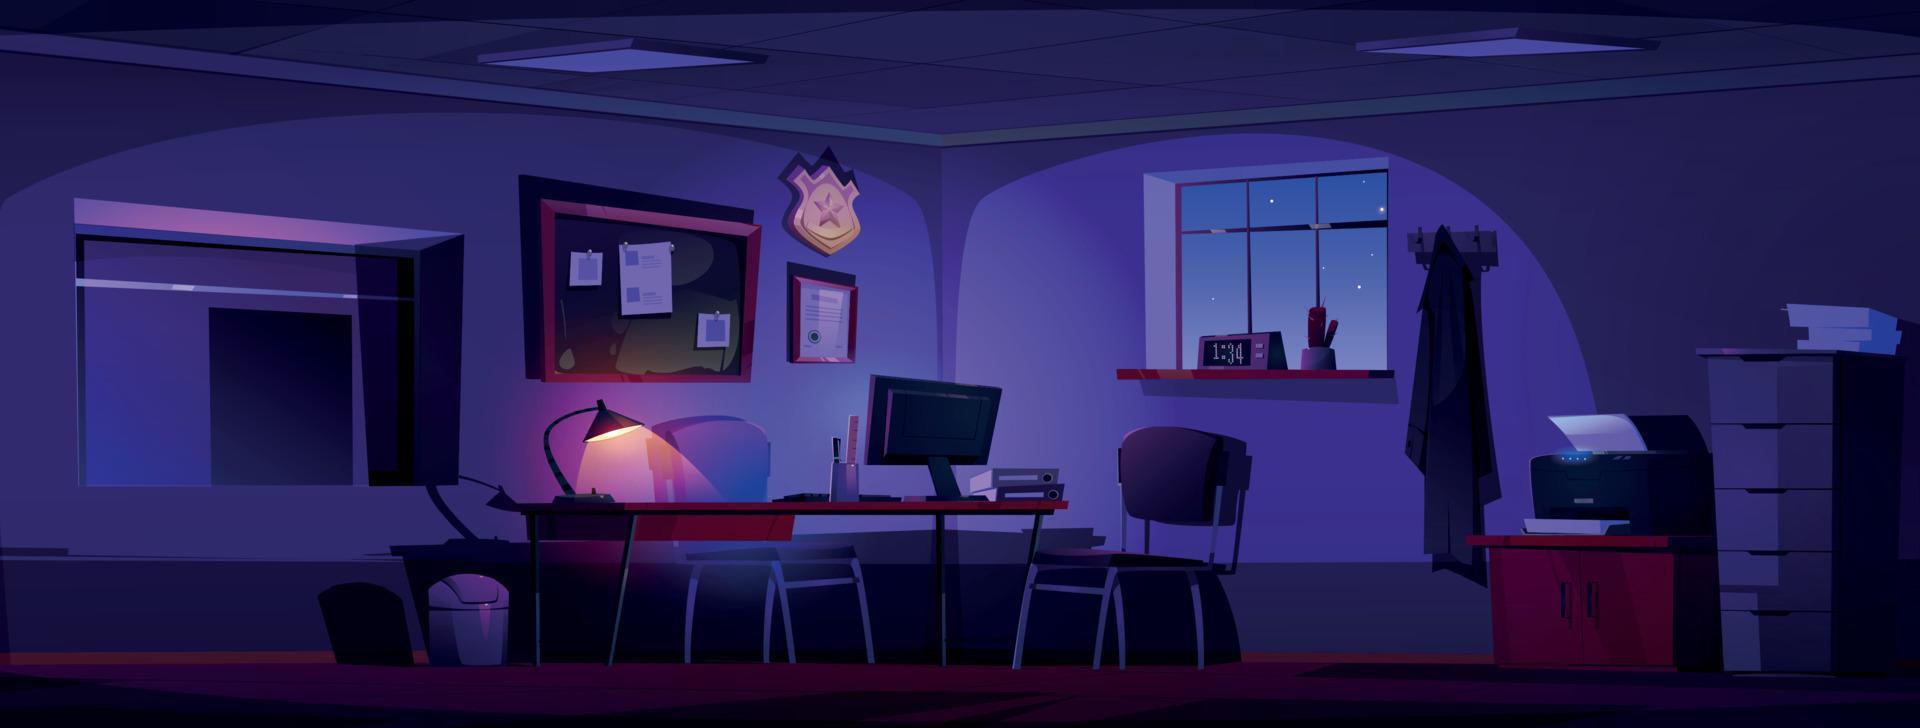 Police department office interior at night vector